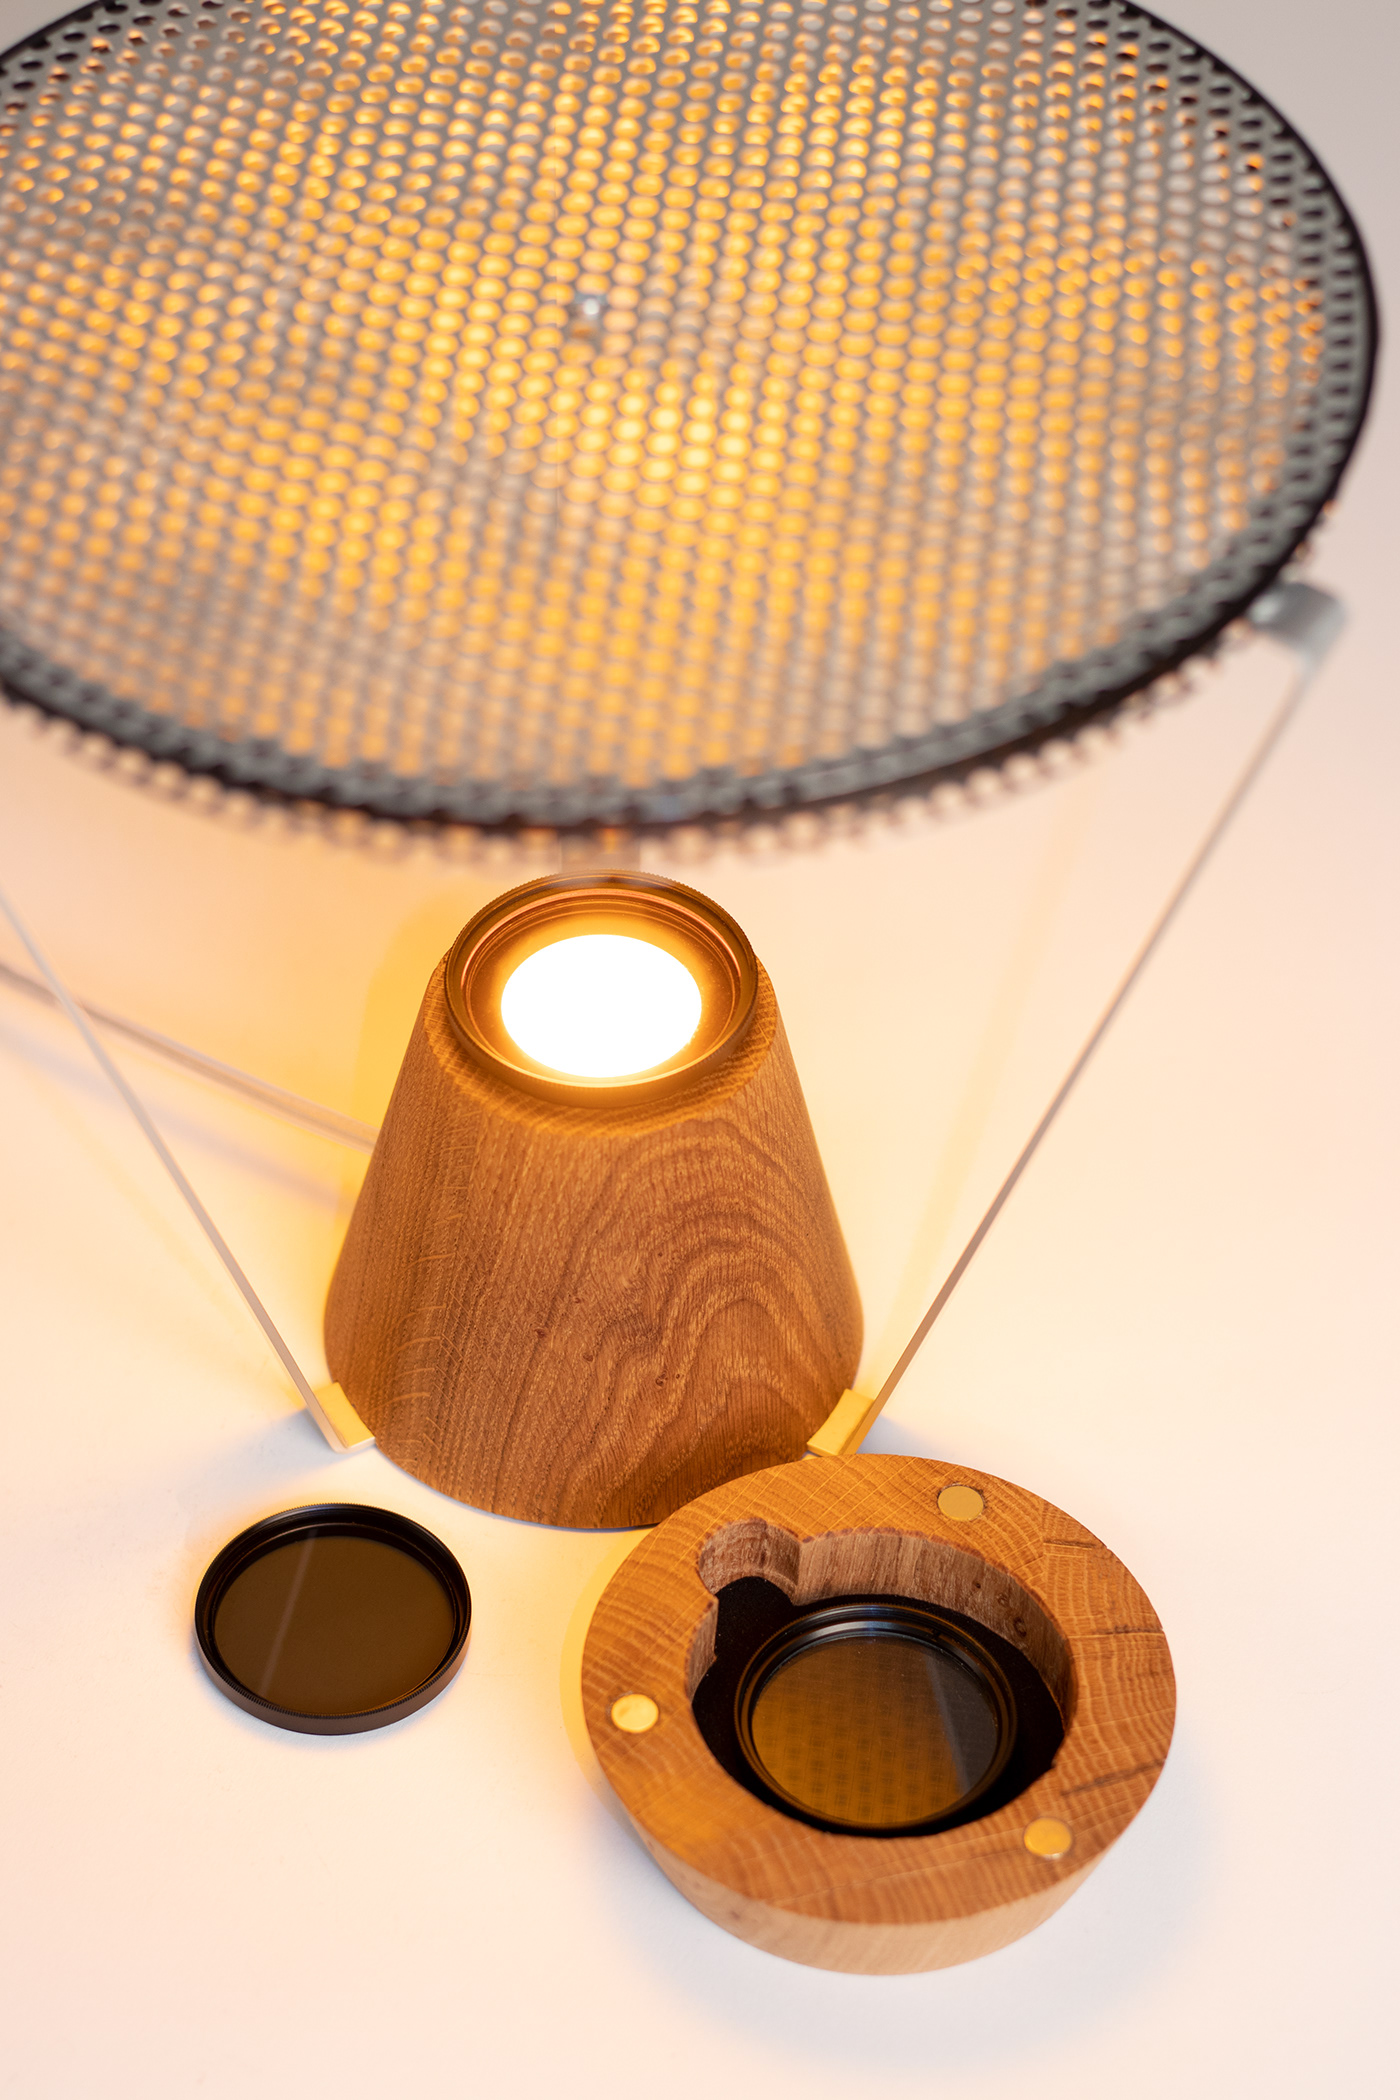 moire Lamp productdesign pattern walnut voyager